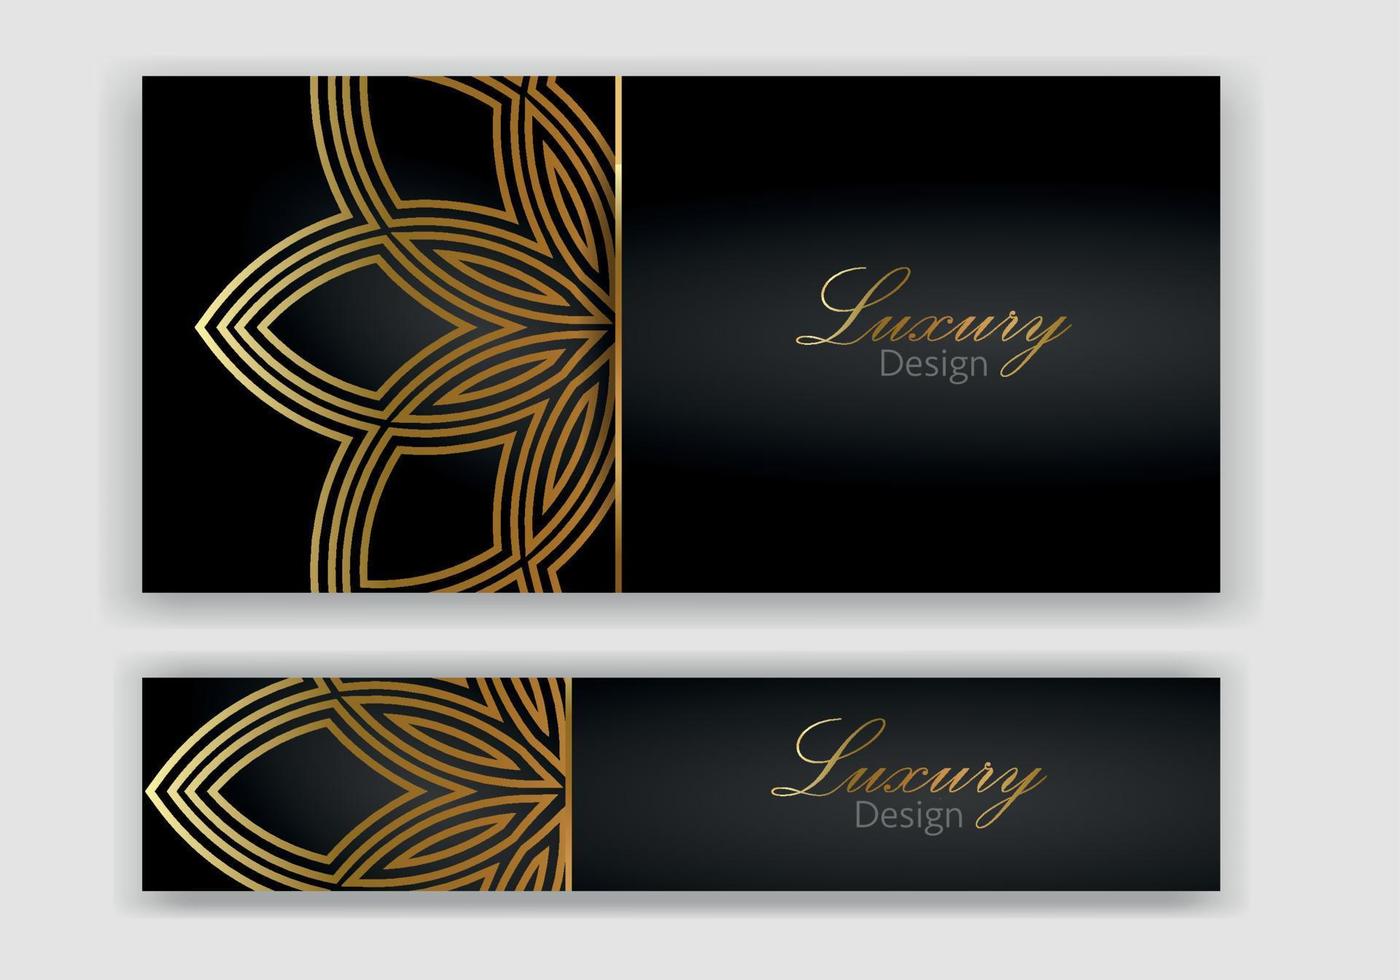 Modern banner design set. Luxury black, gold background with abstract pattern. Premium vector template for menu, invite, brochure template, lux flyer